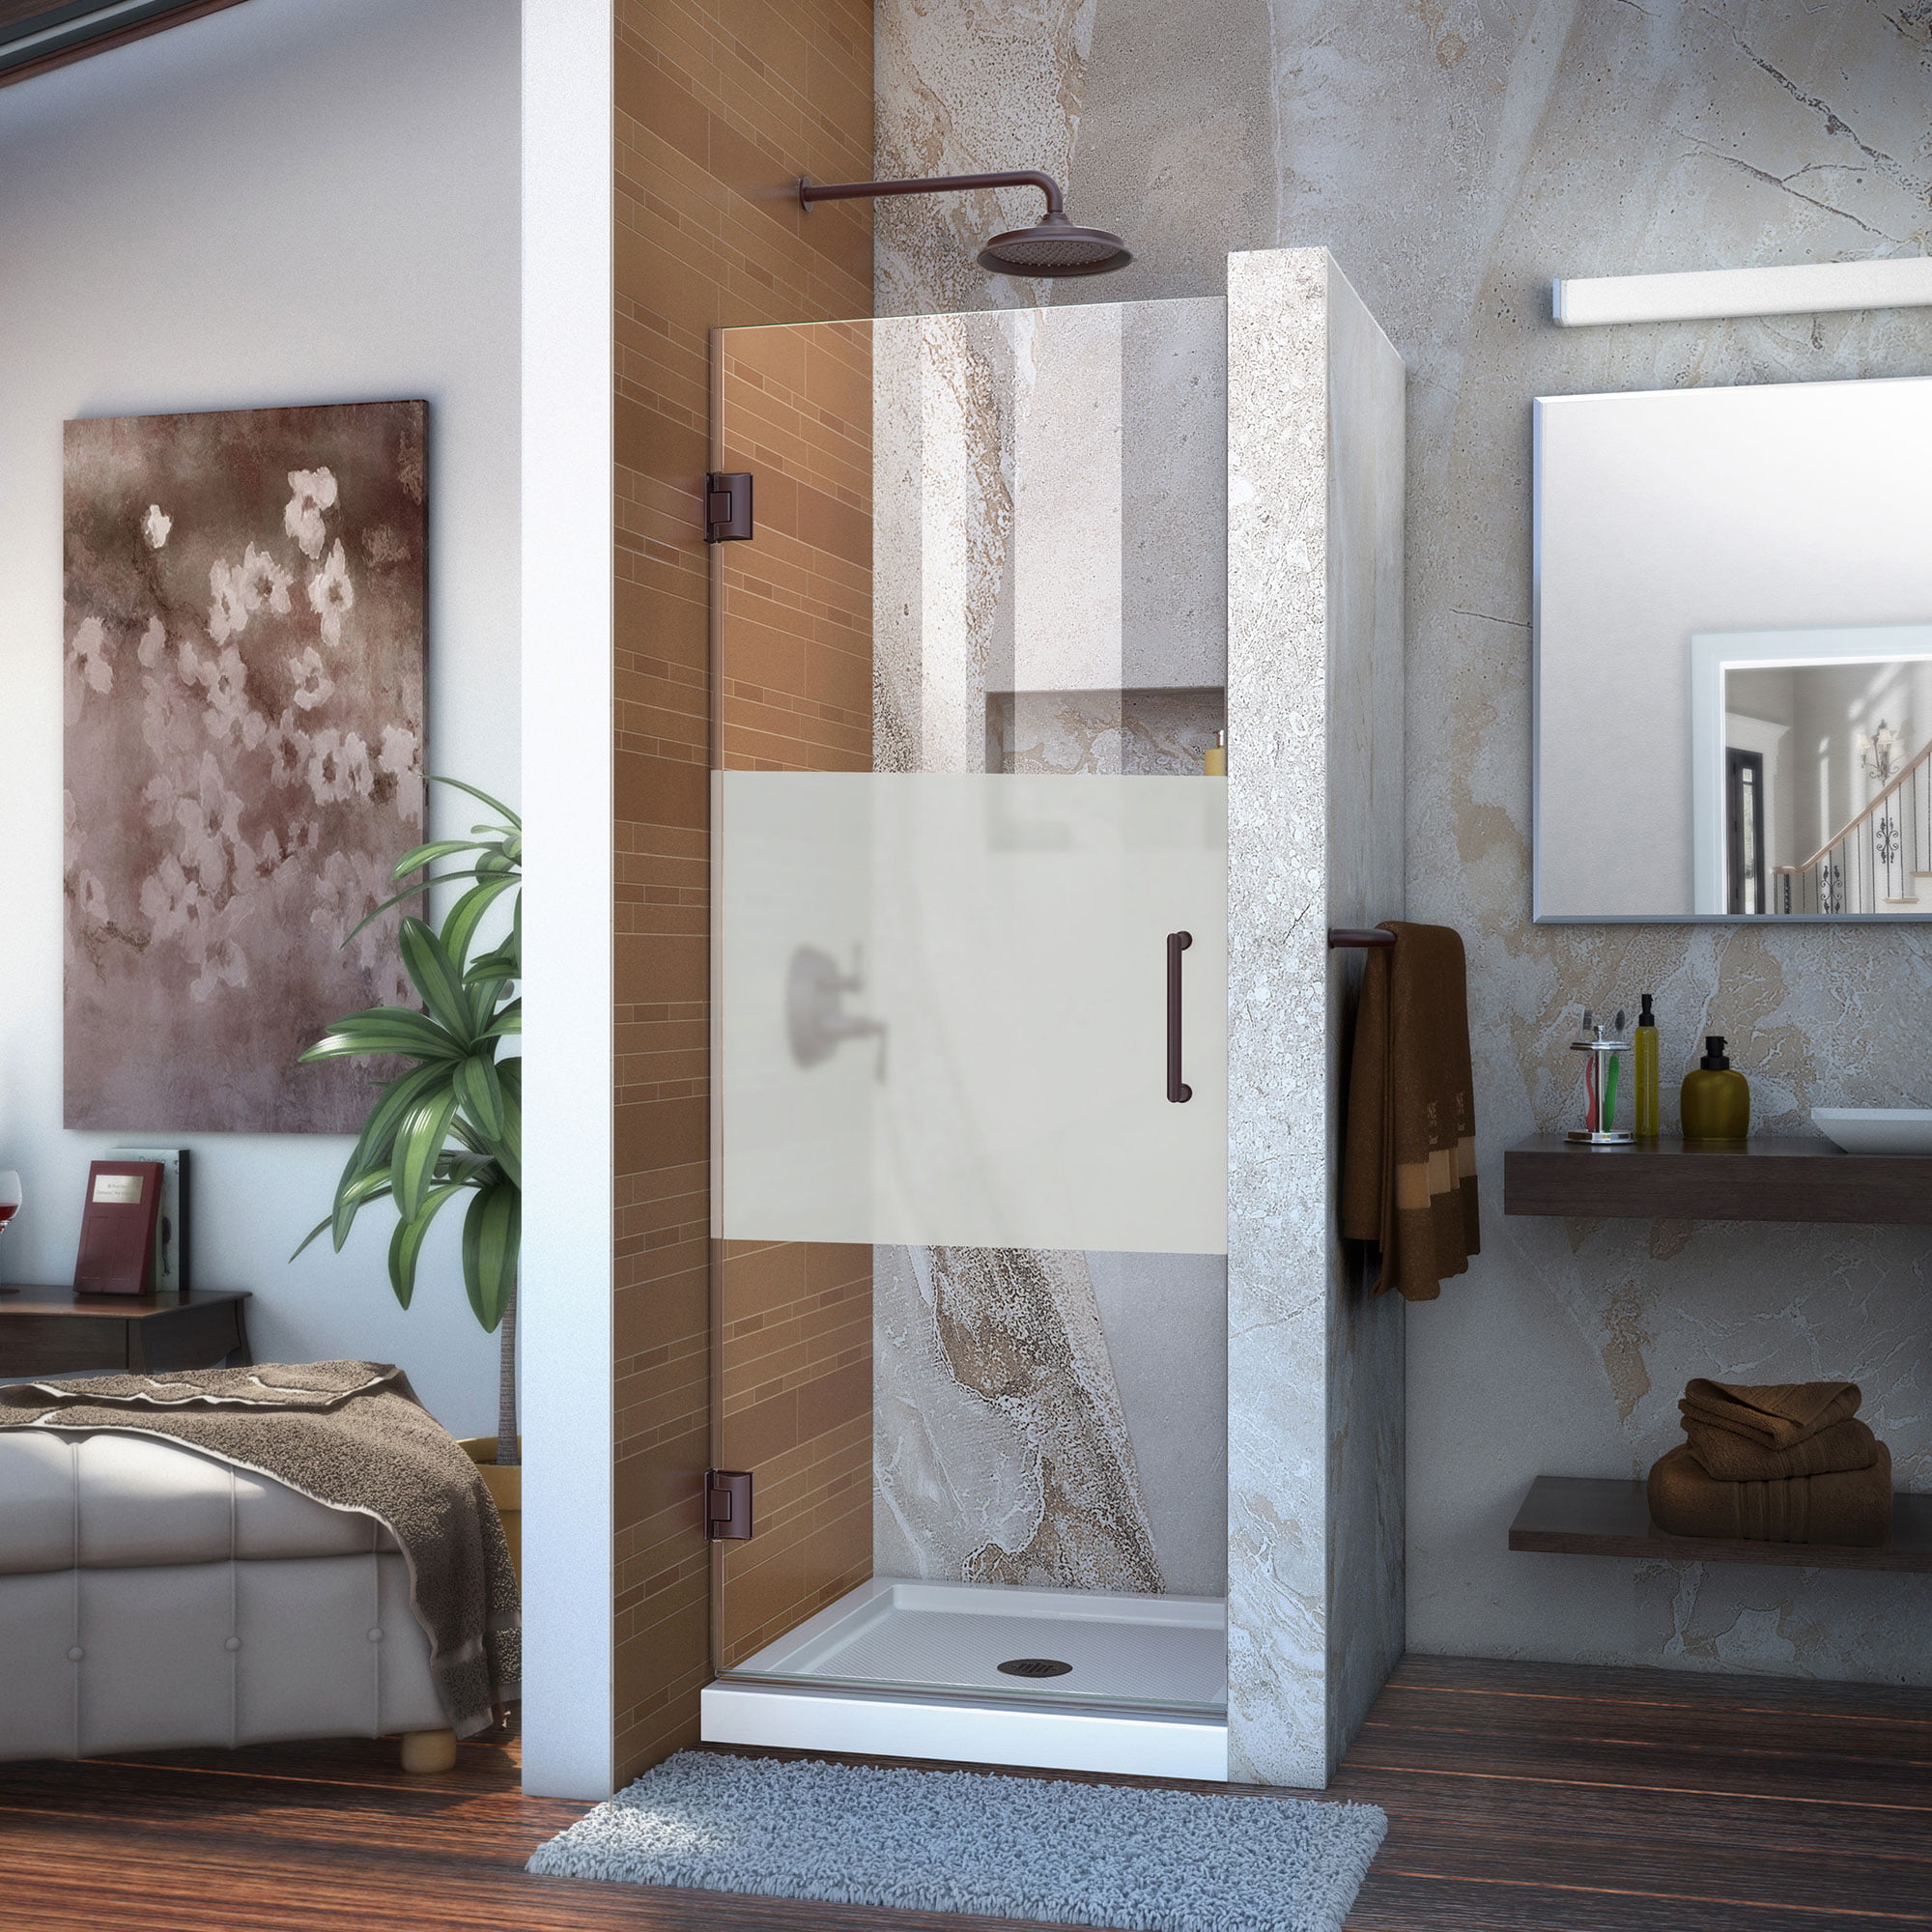 DreamLine Unidoor 29 in. W x 72 in. H Frameless Hinged Shower Door, Frosted Band Glass, in Oil Rubbed Bronze